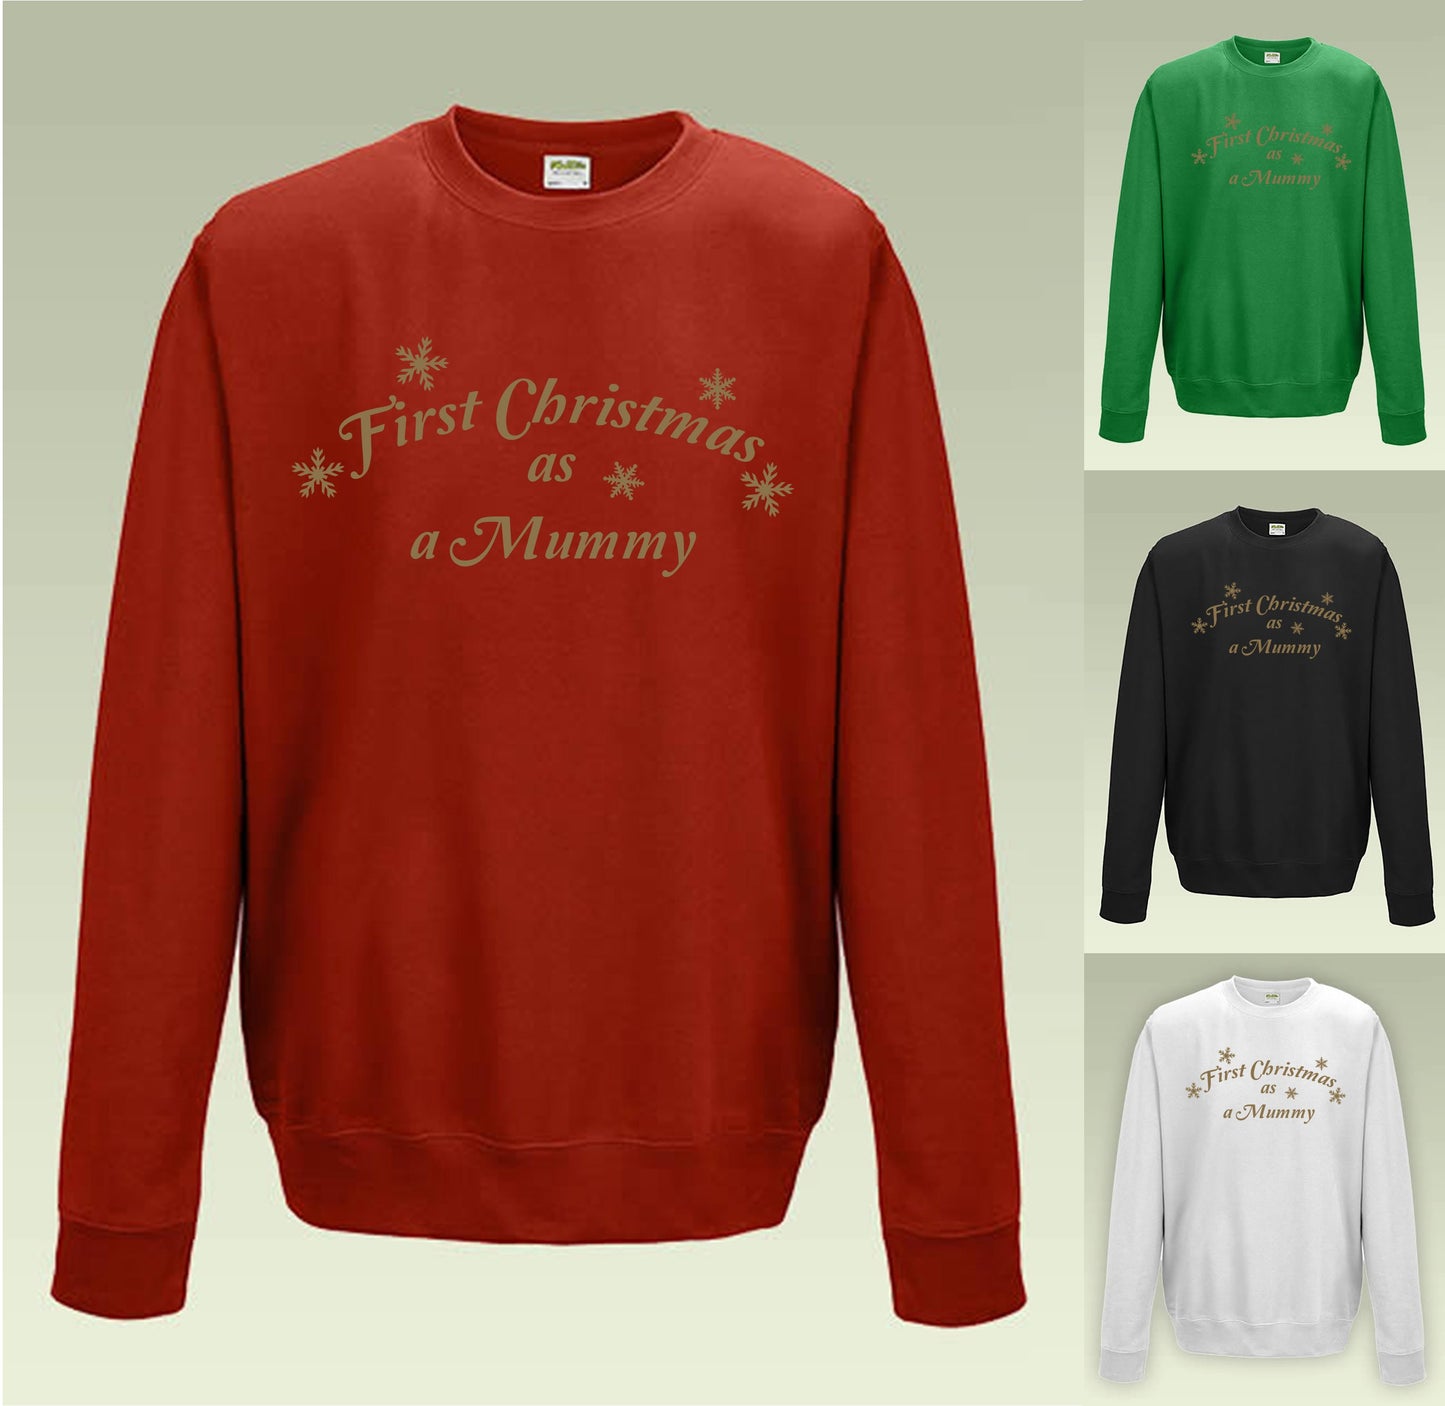 First Christmas a Mummy Sweatshirt JH030 Funny Jumper Sweater - We can change to Mum or Mommy or any other variation